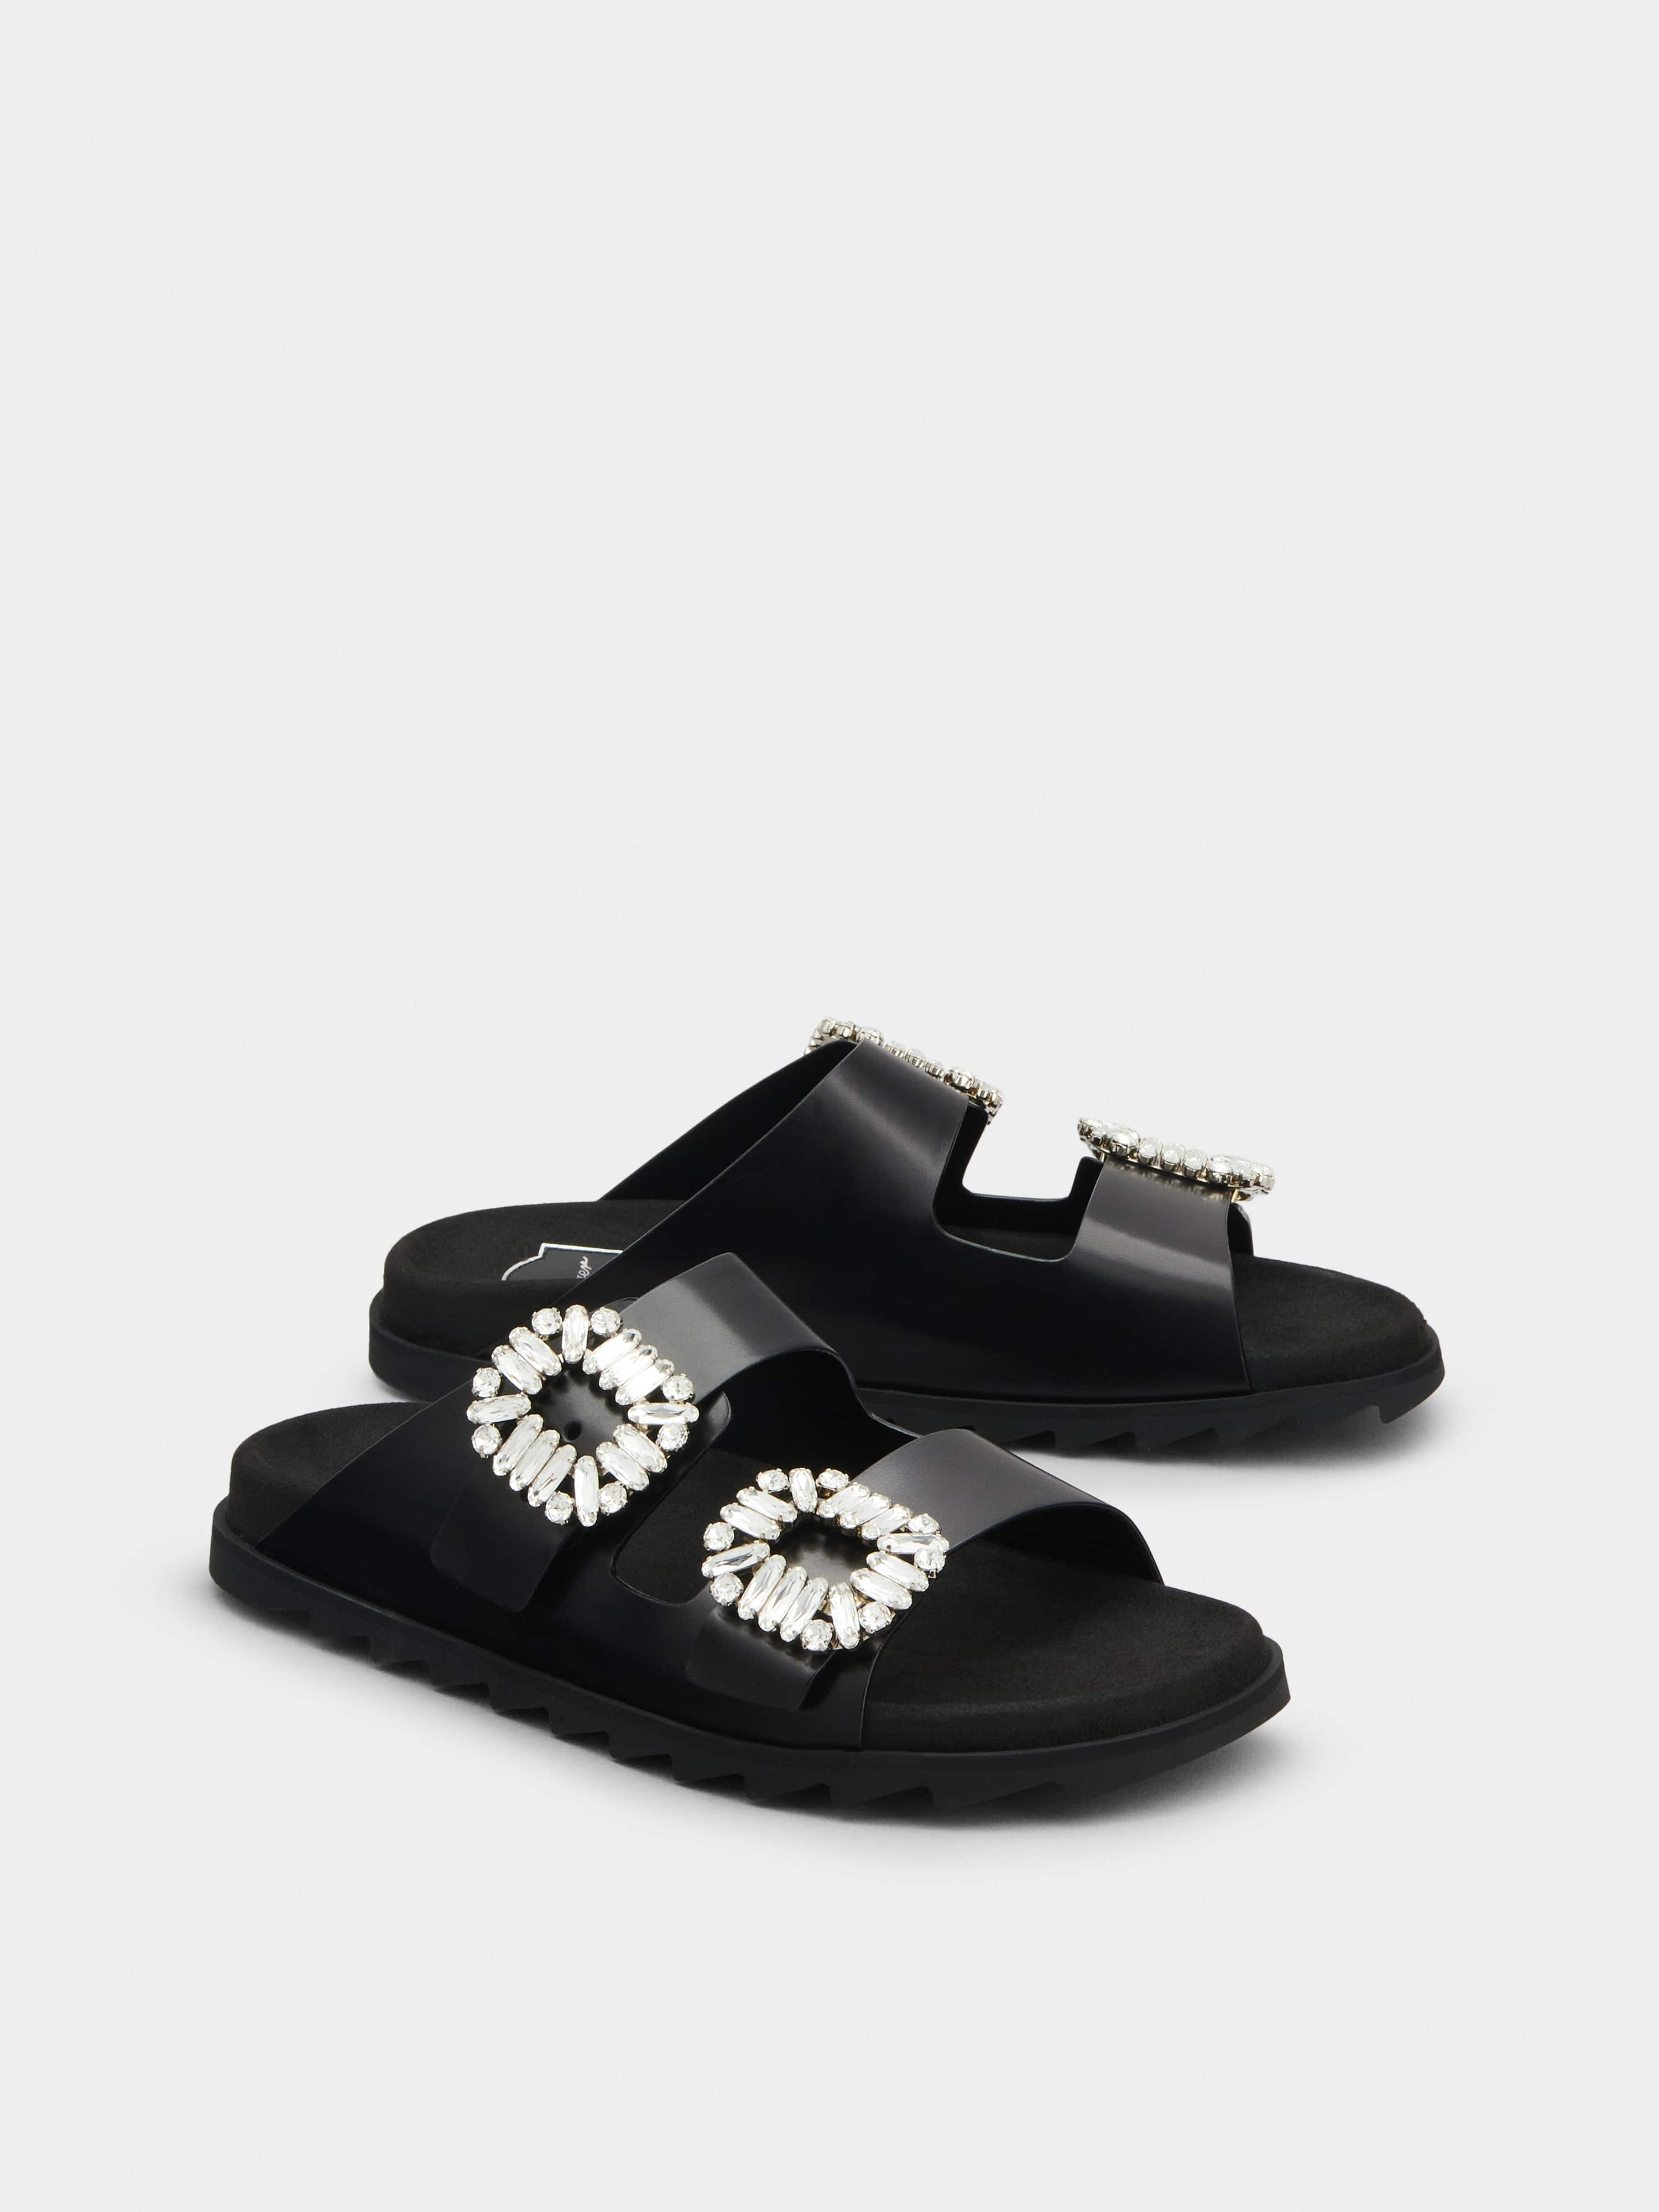 Slidy Viv' Strass Buckle Mules in Leather - 2